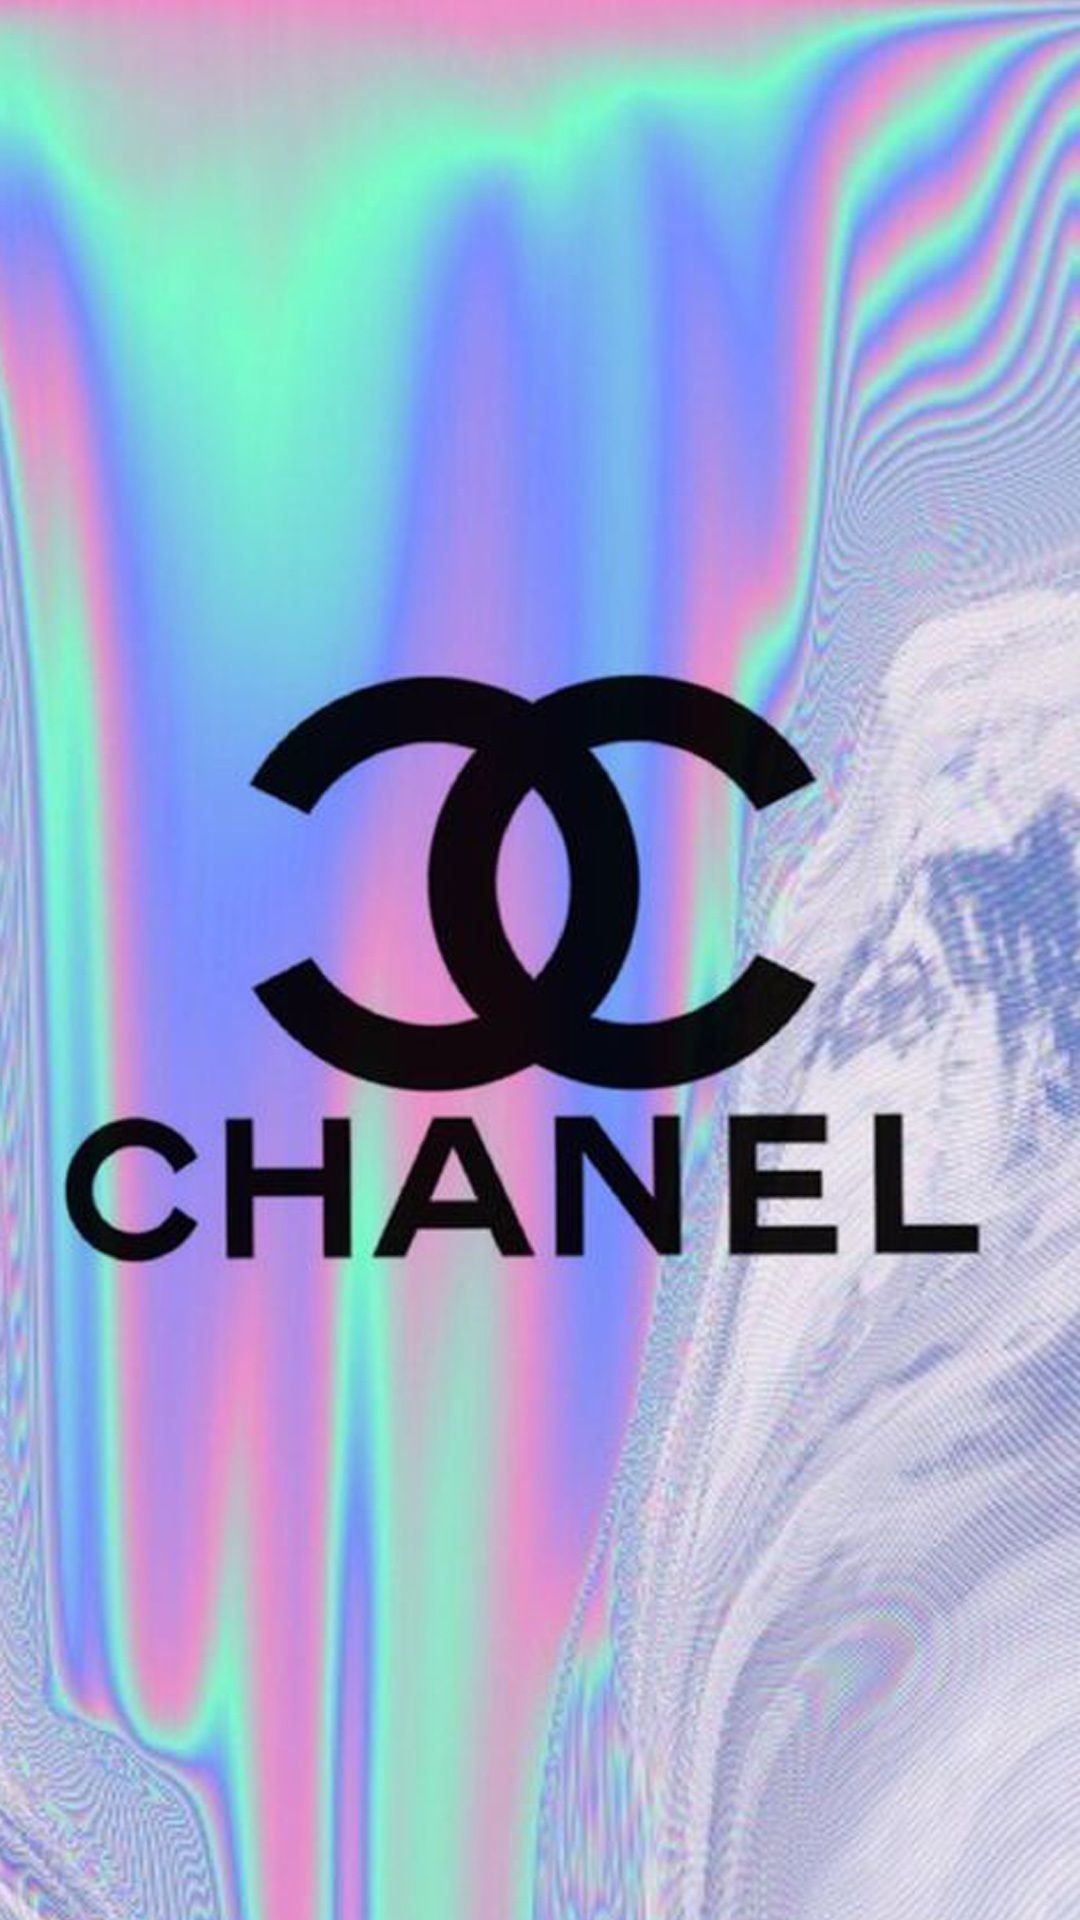 1080x1920 CHANEL Tumblr Wallpaper, Iphone Background Wallpaper, Cute Wallpaper For  Phone, Wallpaper Wallpapers,